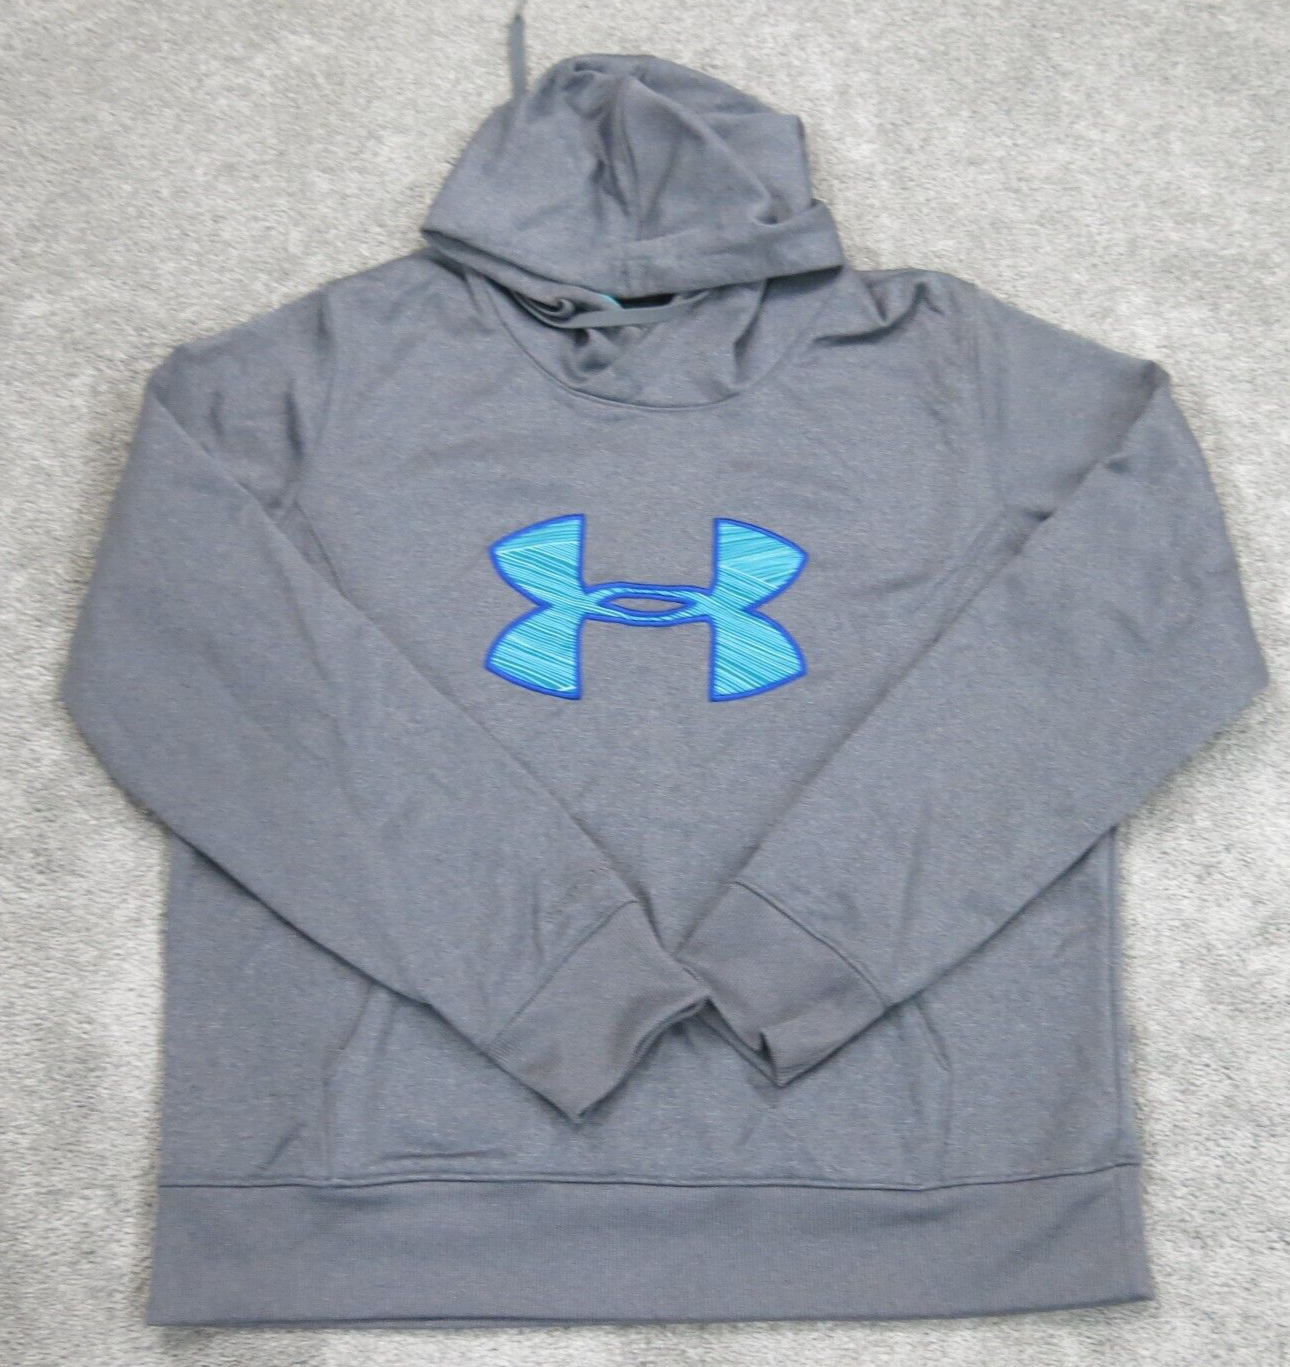 Under Armour T Shirt Womens Size Medium Blue Solid Long Sleeve Fitted –  Goodfair